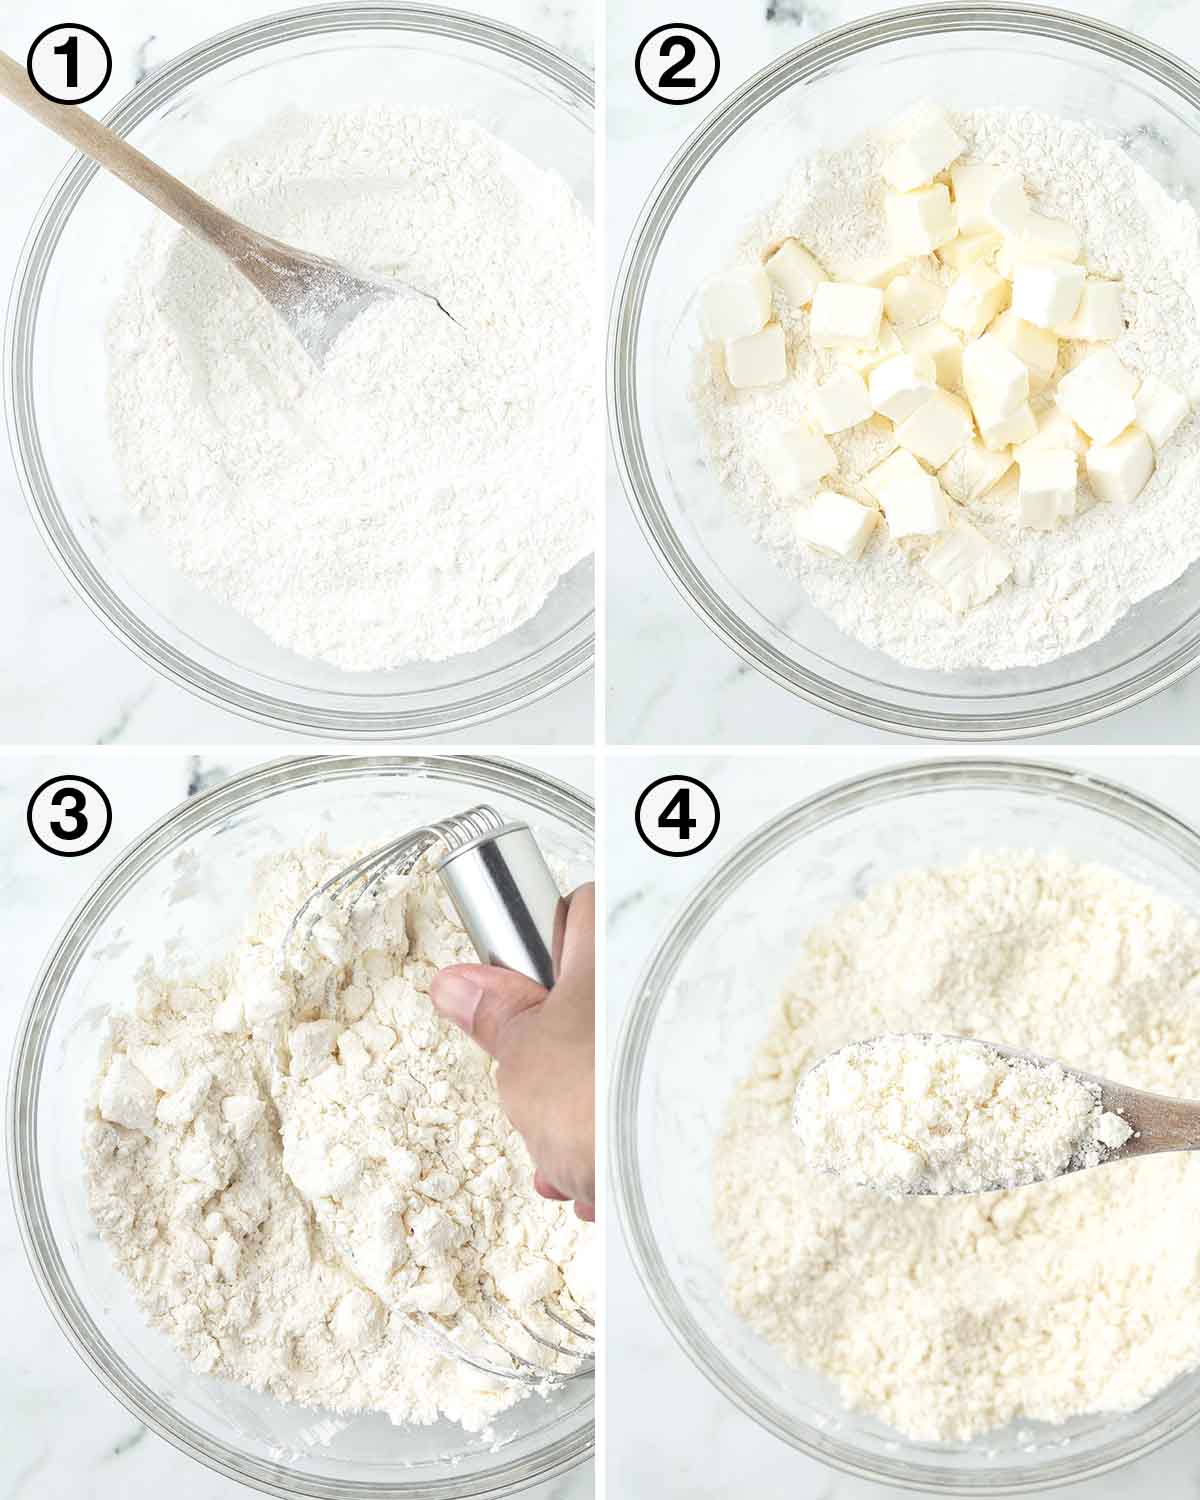 A collage of four images showing the first sequence of steps needed to make a flaky vegan pie crust.